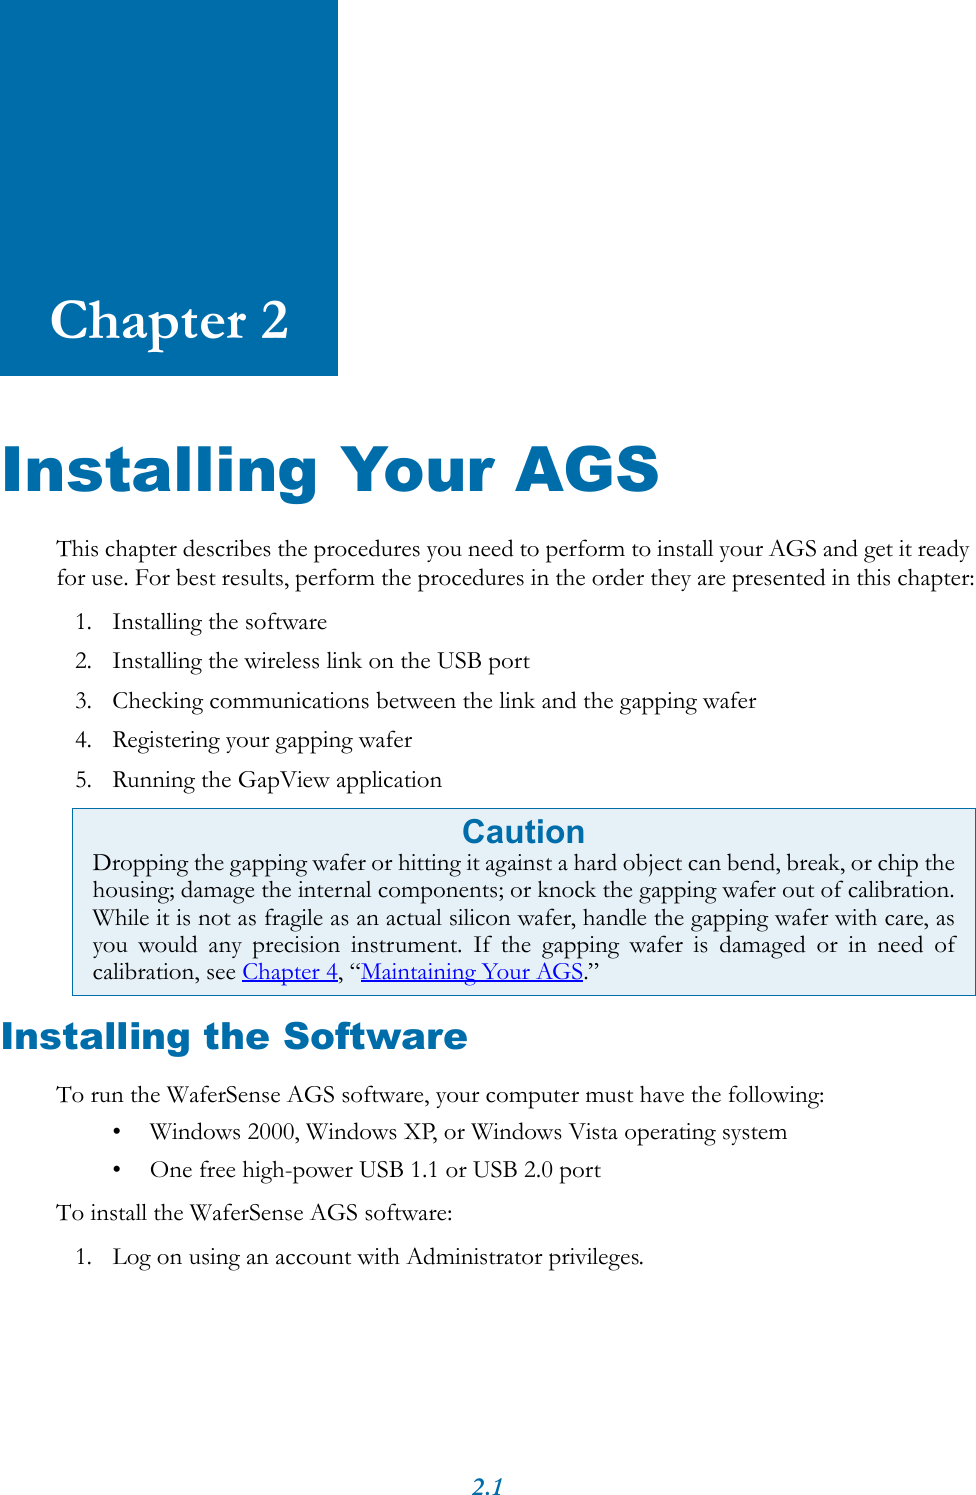 2.1Chapter 2Installing Your AGSThis chapter describes the procedures you need to perform to install your AGS and get it ready for use. For best results, perform the procedures in the order they are presented in this chapter:1. Installing the software2. Installing the wireless link on the USB port3. Checking communications between the link and the gapping wafer4. Registering your gapping wafer5. Running the GapView applicationInstalling the SoftwareTo run the WaferSense AGS software, your computer must have the following: • Windows 2000, Windows XP, or Windows Vista operating system• One free high-power USB 1.1 or USB 2.0 portTo install the WaferSense AGS software:1. Log on using an account with Administrator privileges.CautionDropping the gapping wafer or hitting it against a hard object can bend, break, or chip thehousing; damage the internal components; or knock the gapping wafer out of calibration.While it is not as fragile as an actual silicon wafer, handle the gapping wafer with care, asyou would any precision instrument. If the gapping wafer is damaged or in need ofcalibration, see Chapter 4, “Maintaining Your AGS.”